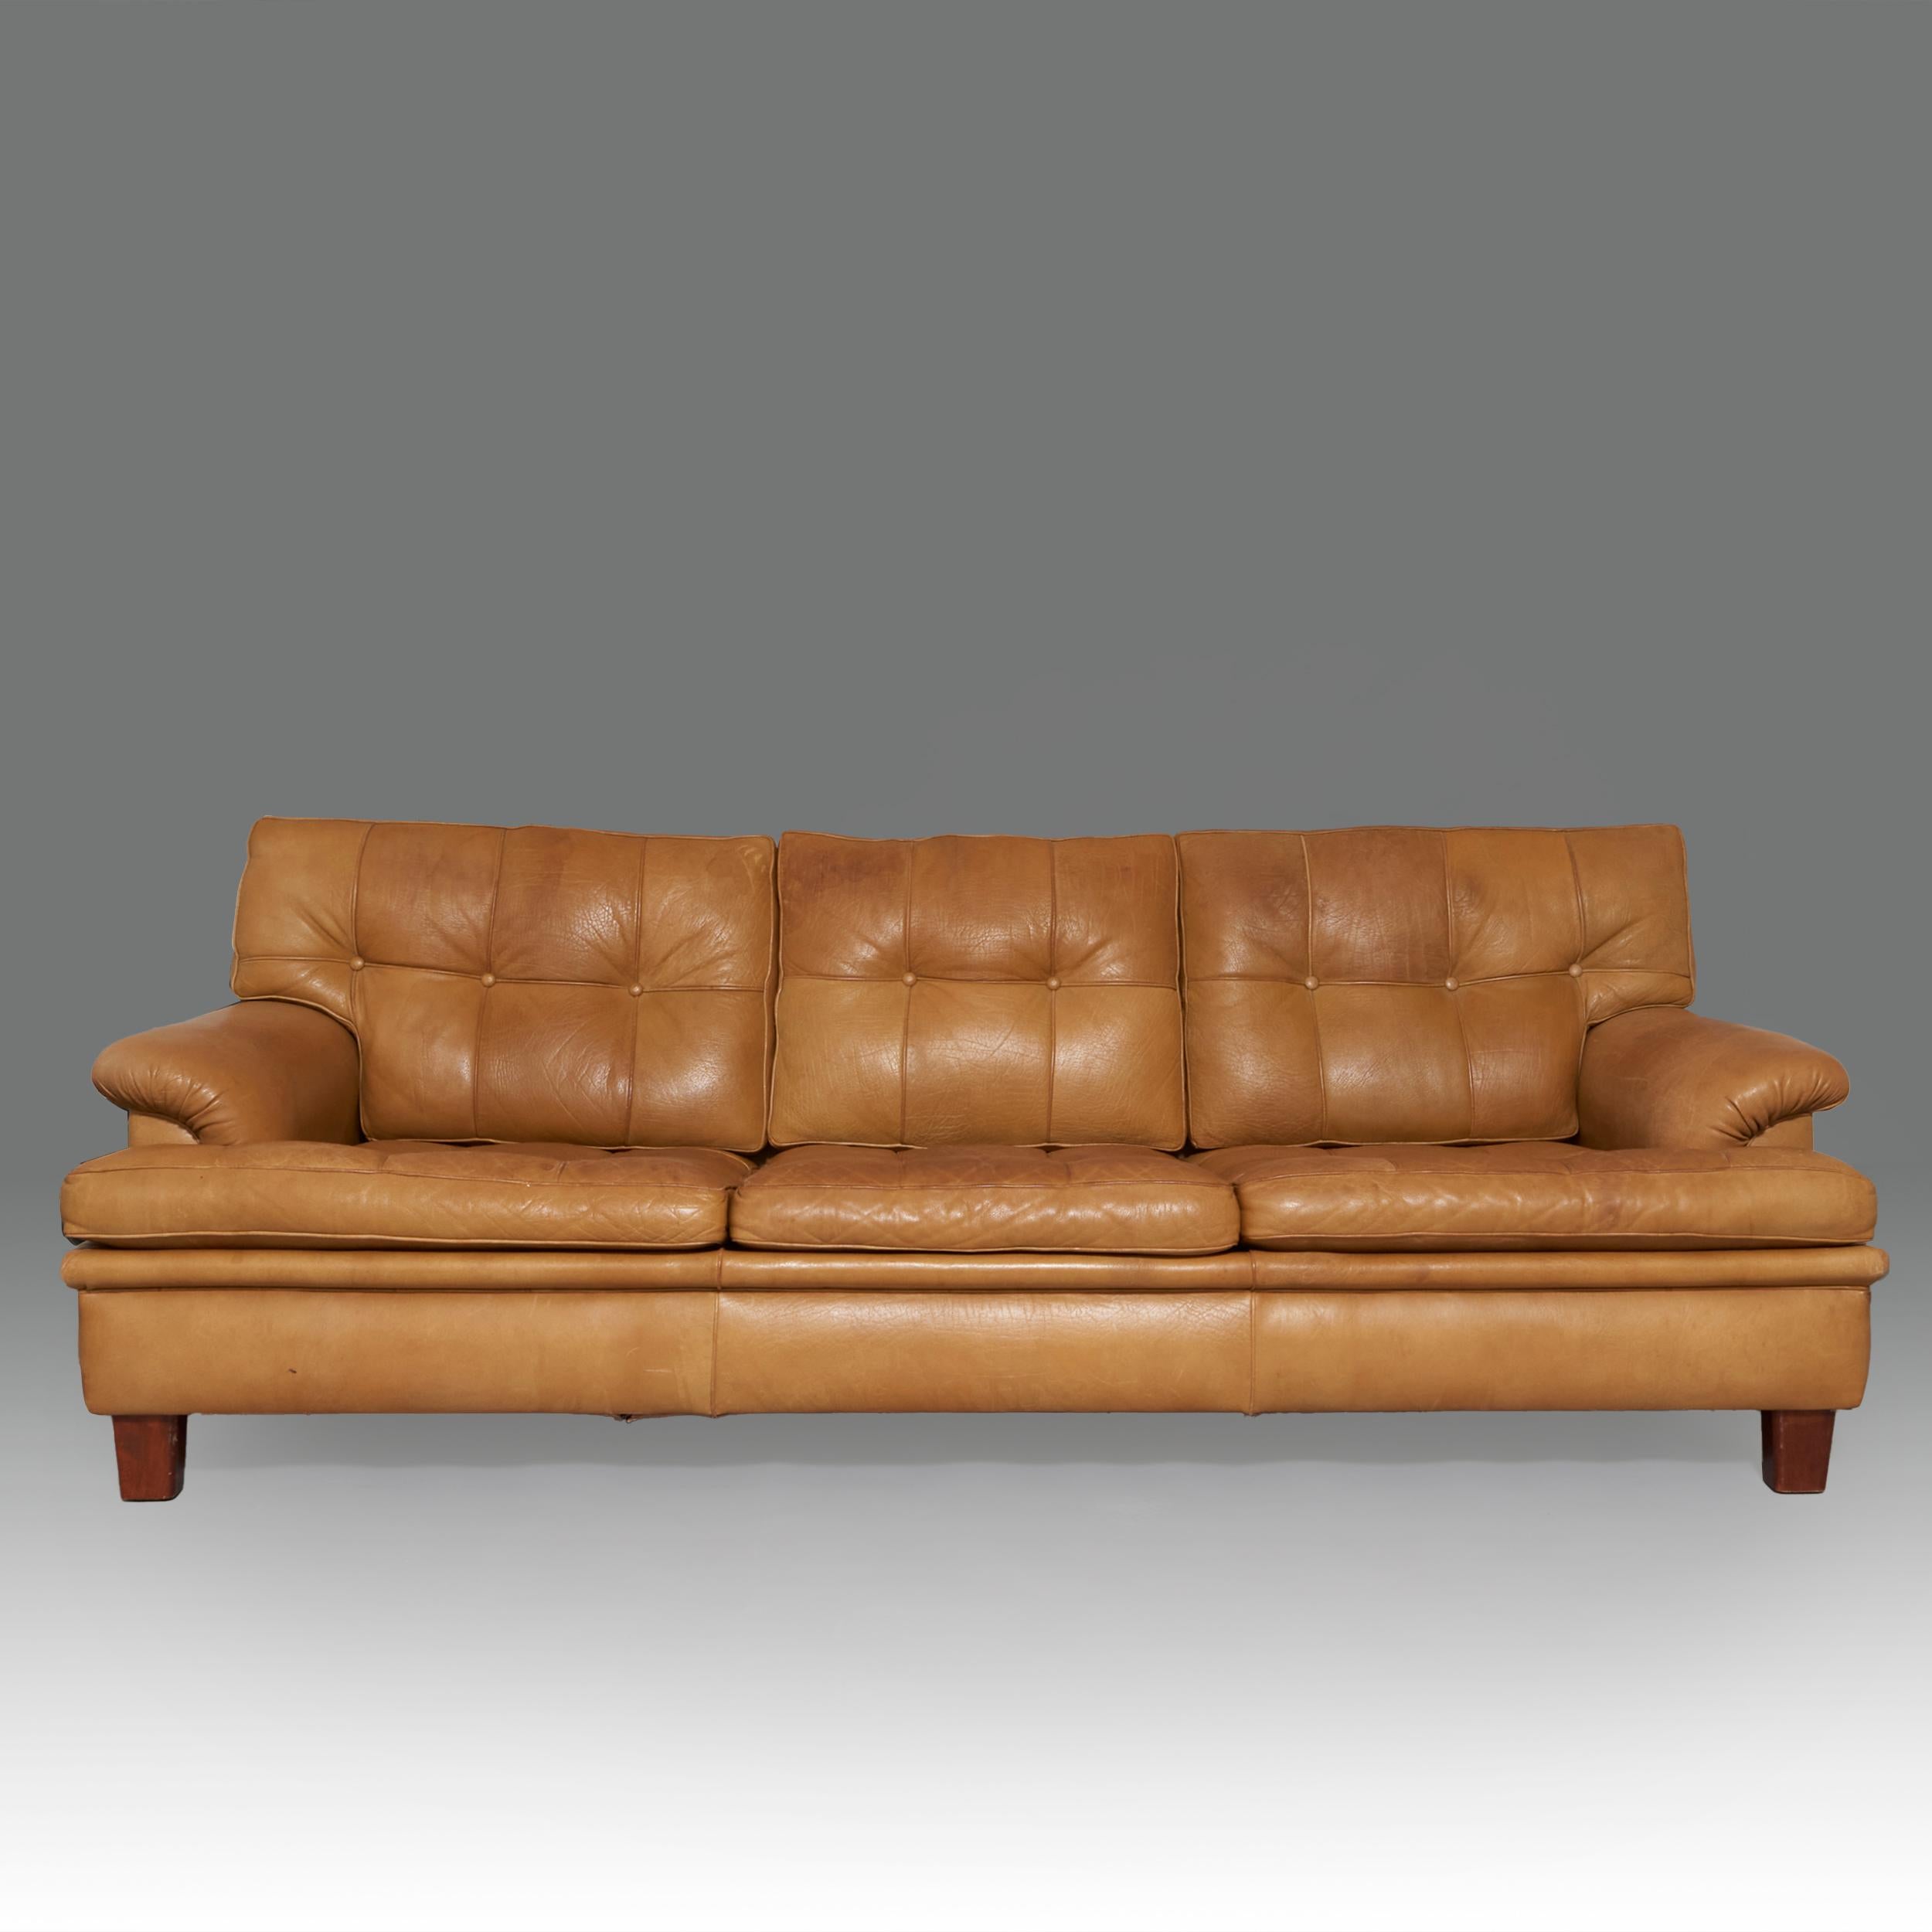 ‘’Saturn’’ sofa designed by Arne Norell for Aneby. Sweden, 1970’s. Very good condition. Original leather with Patina and signs of use according to time.
Arne Norell was a Swedish designer founder of the homonymous company Møbel AB Arne Norell.